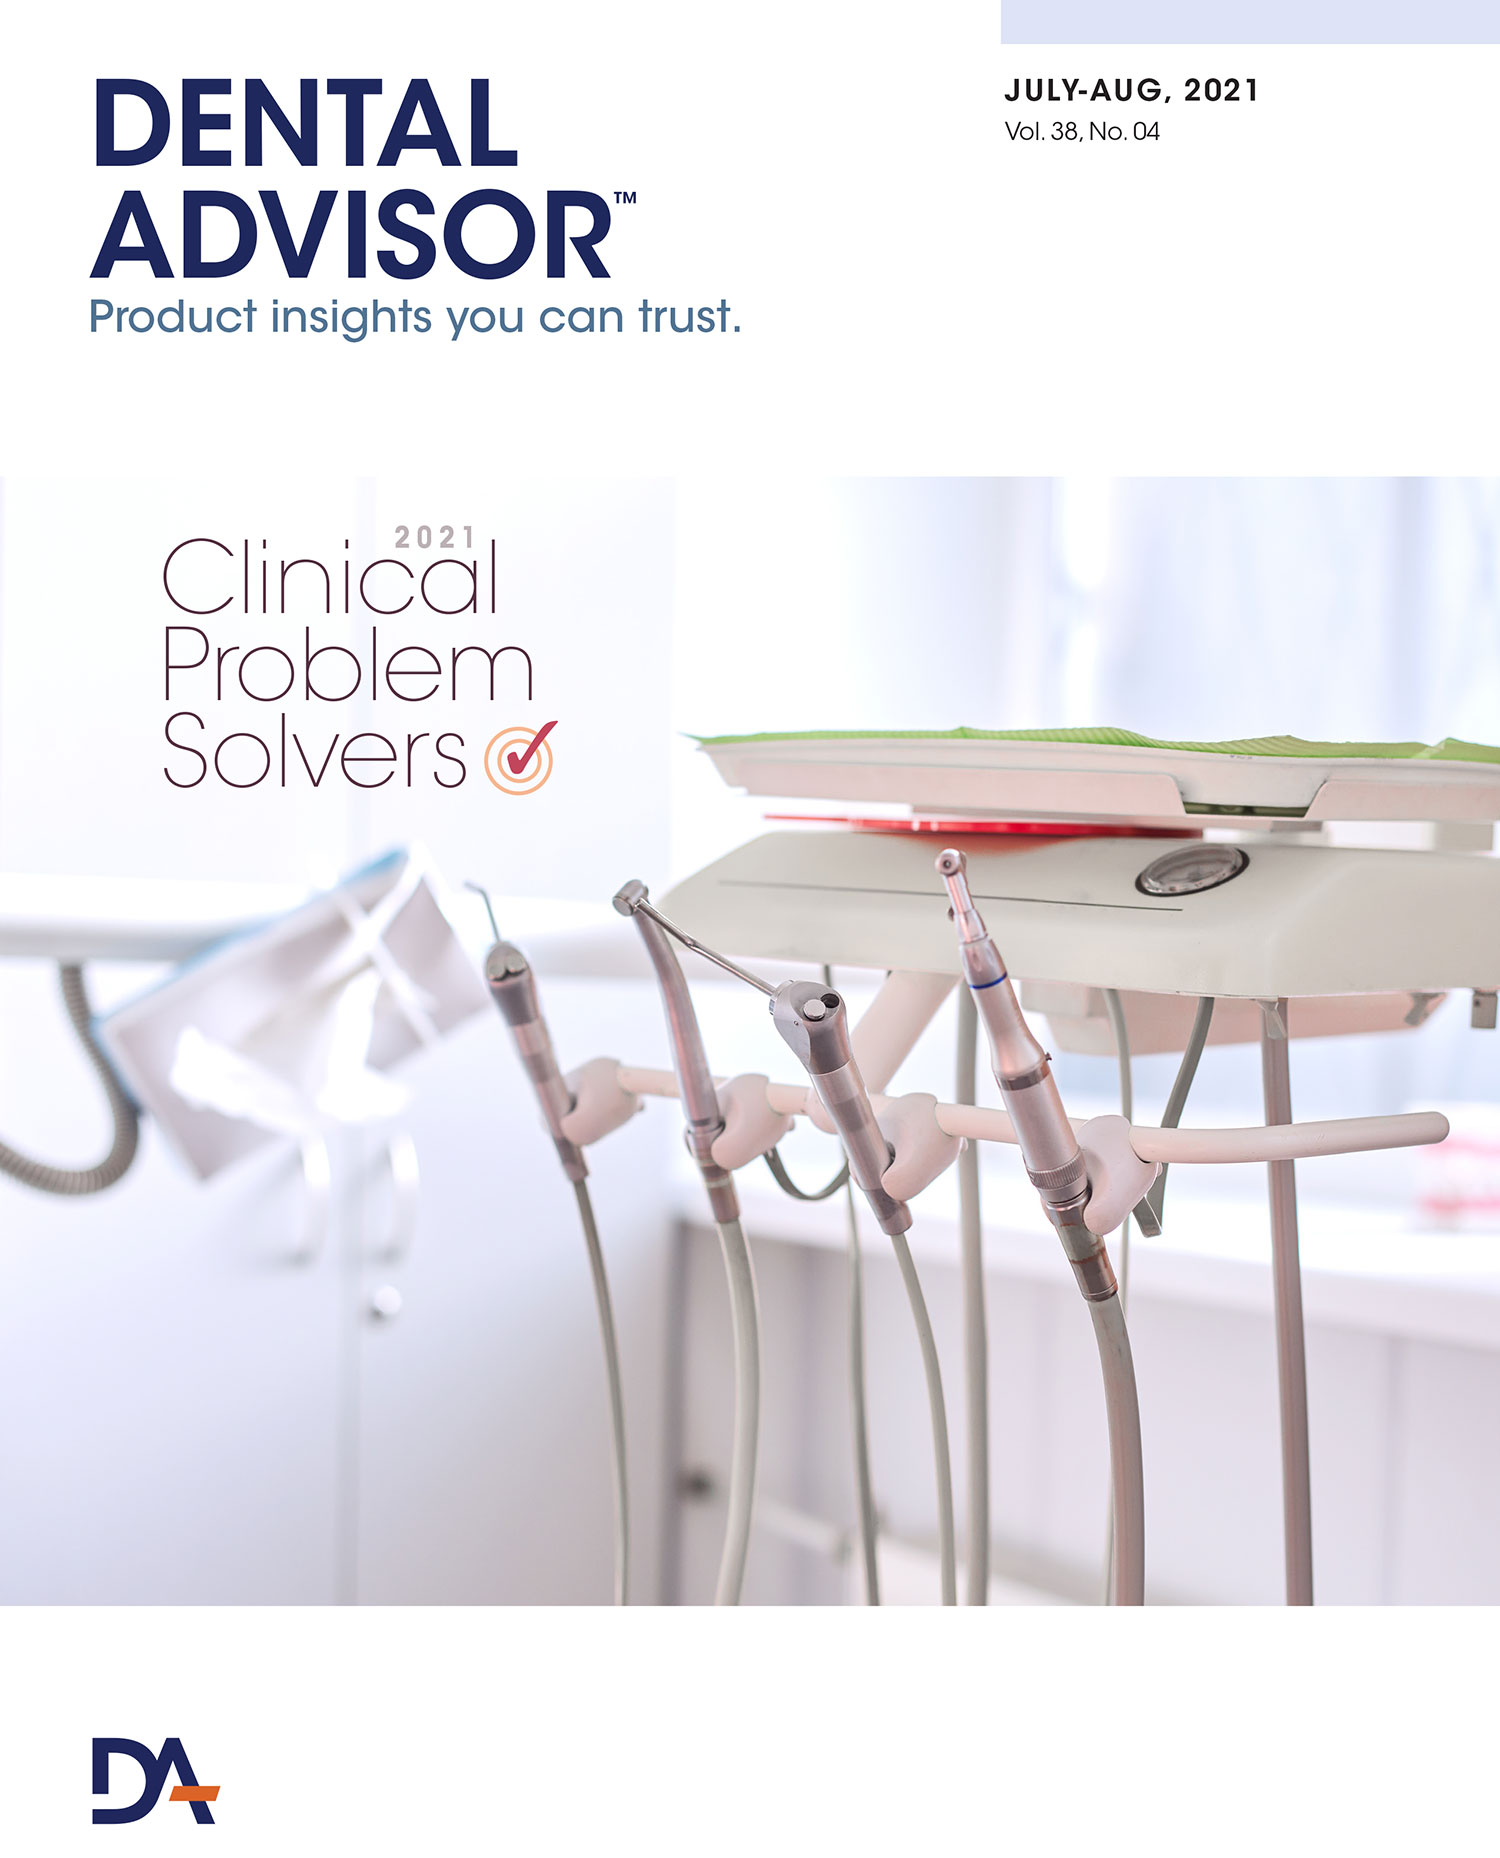 38-04 2021 Clinical Problem Solvers